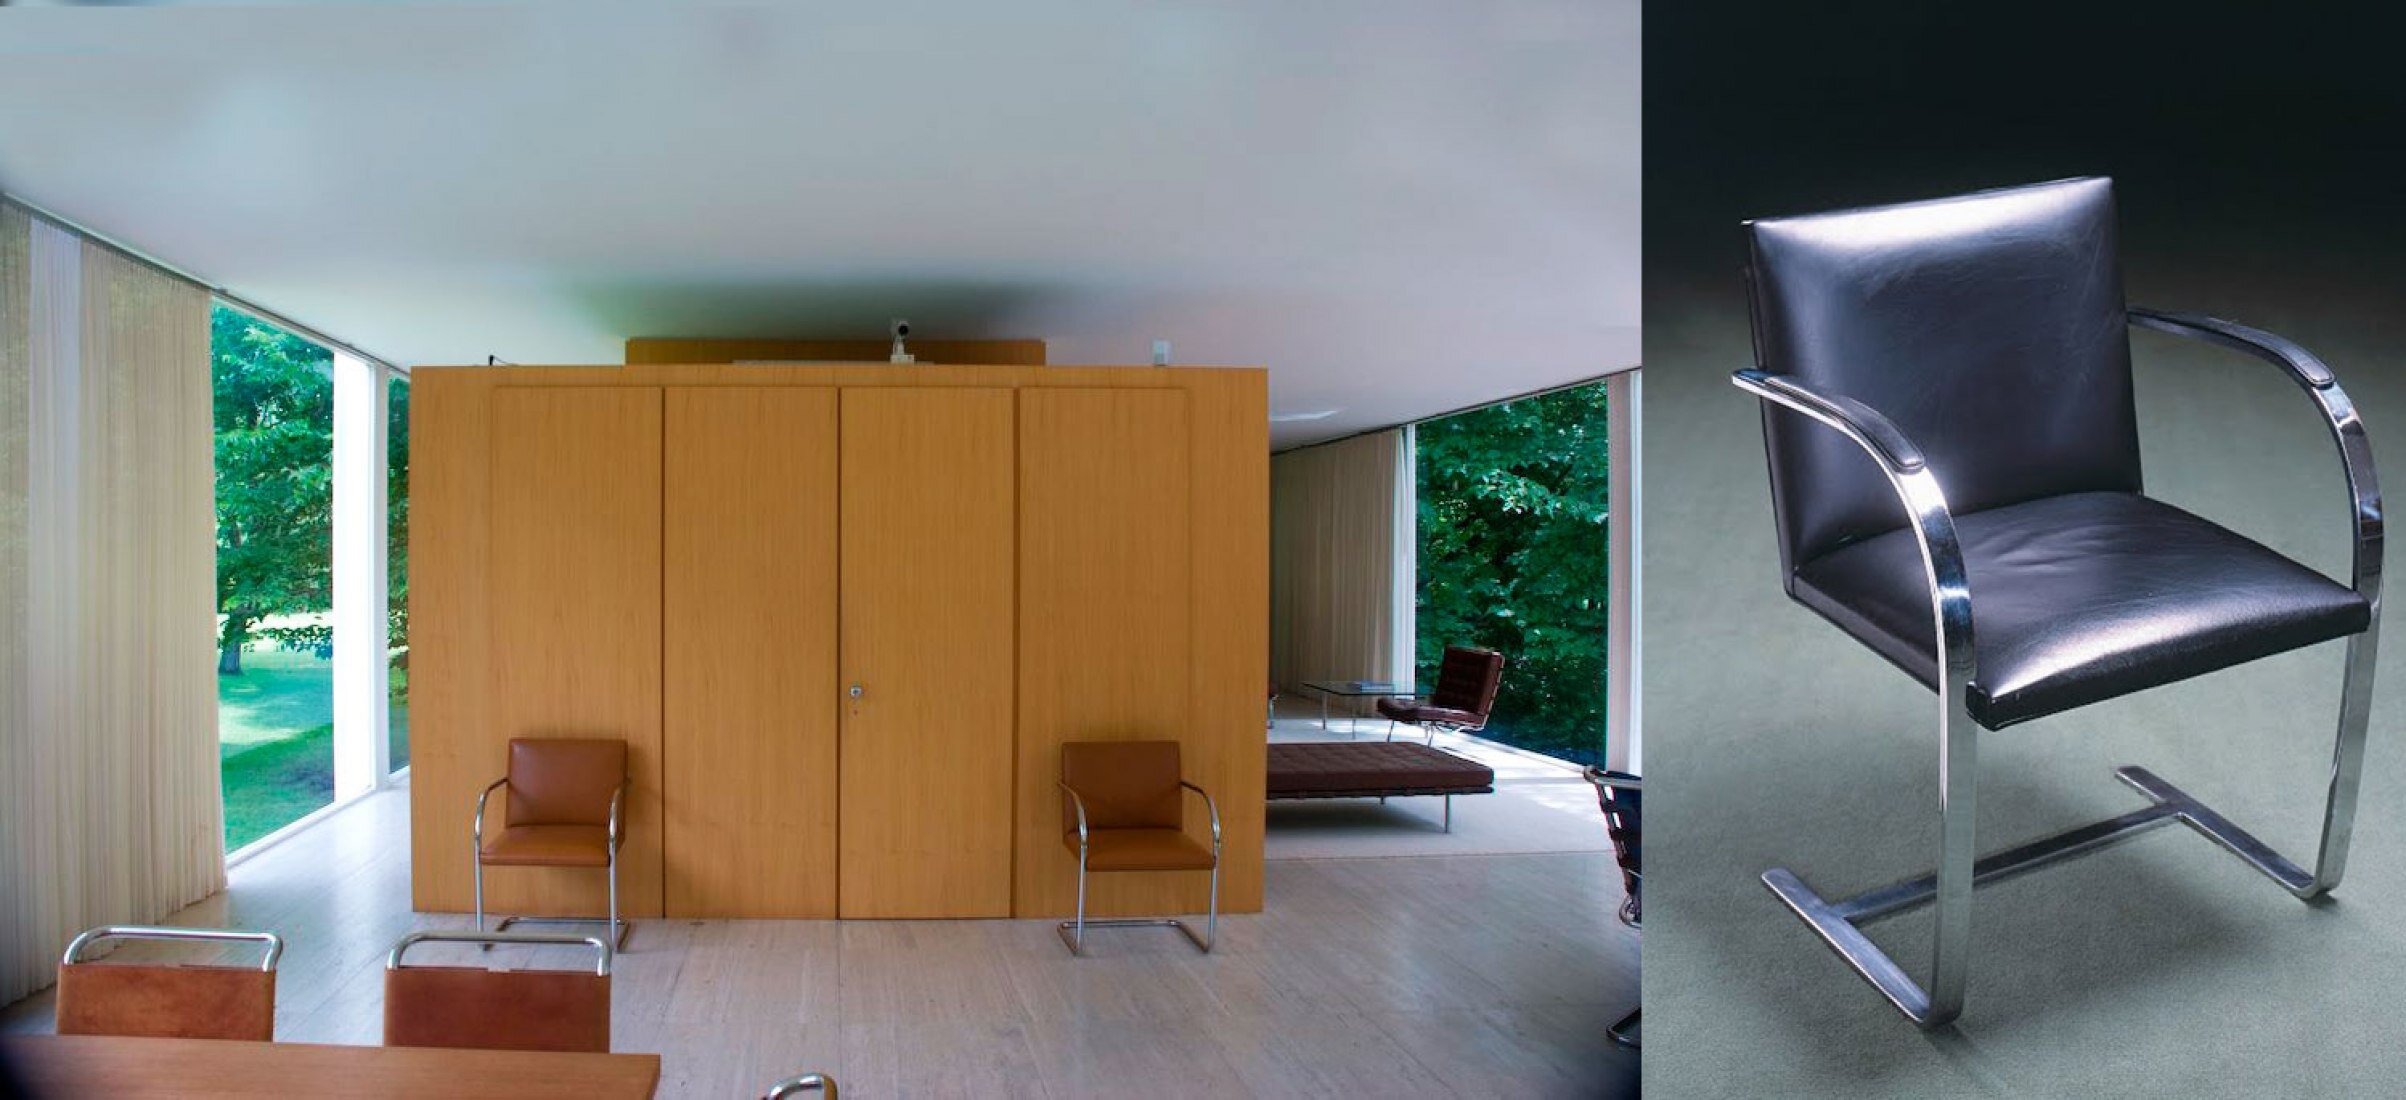 Brno Chair, Tugendhat House Interior